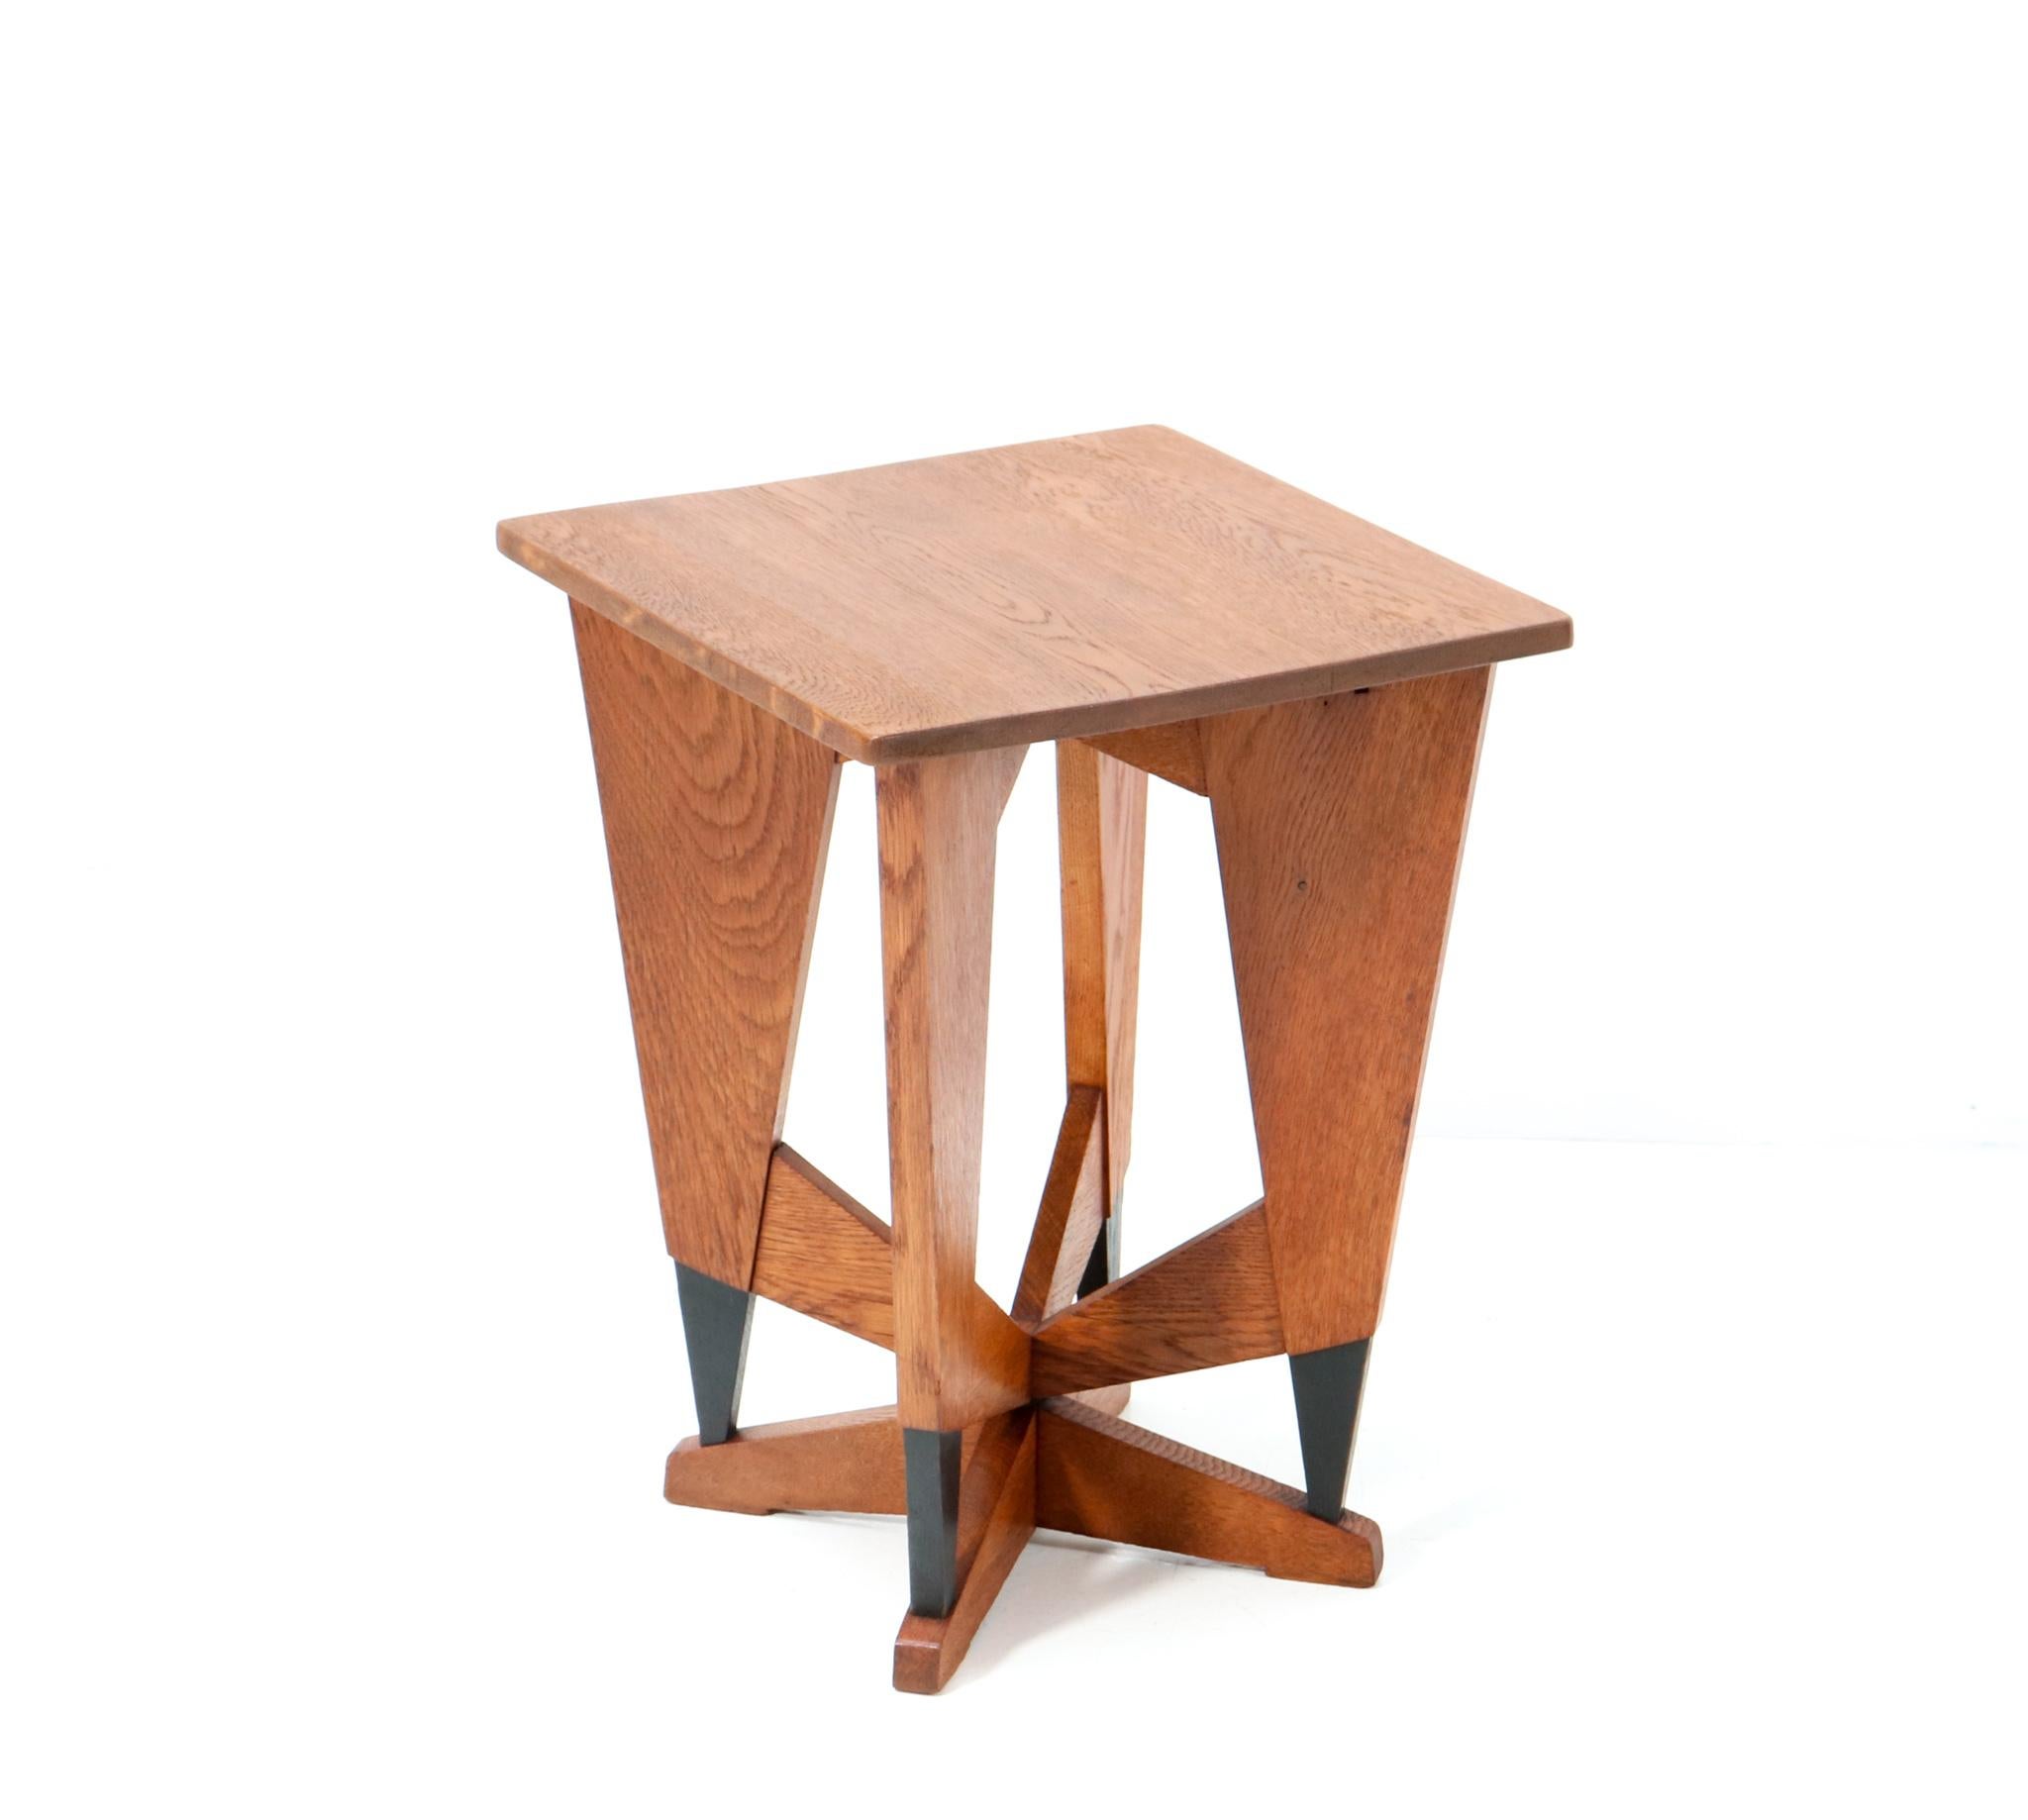 Magnificent and ultra rare Art Deco Modernist side table or pedestal table.
Design by P.E.L. Izeren for De Genneper Molen.
Striking Dutch design from the 1920s.
Solid oak with original black lacquered elements.
The Modernist look of this